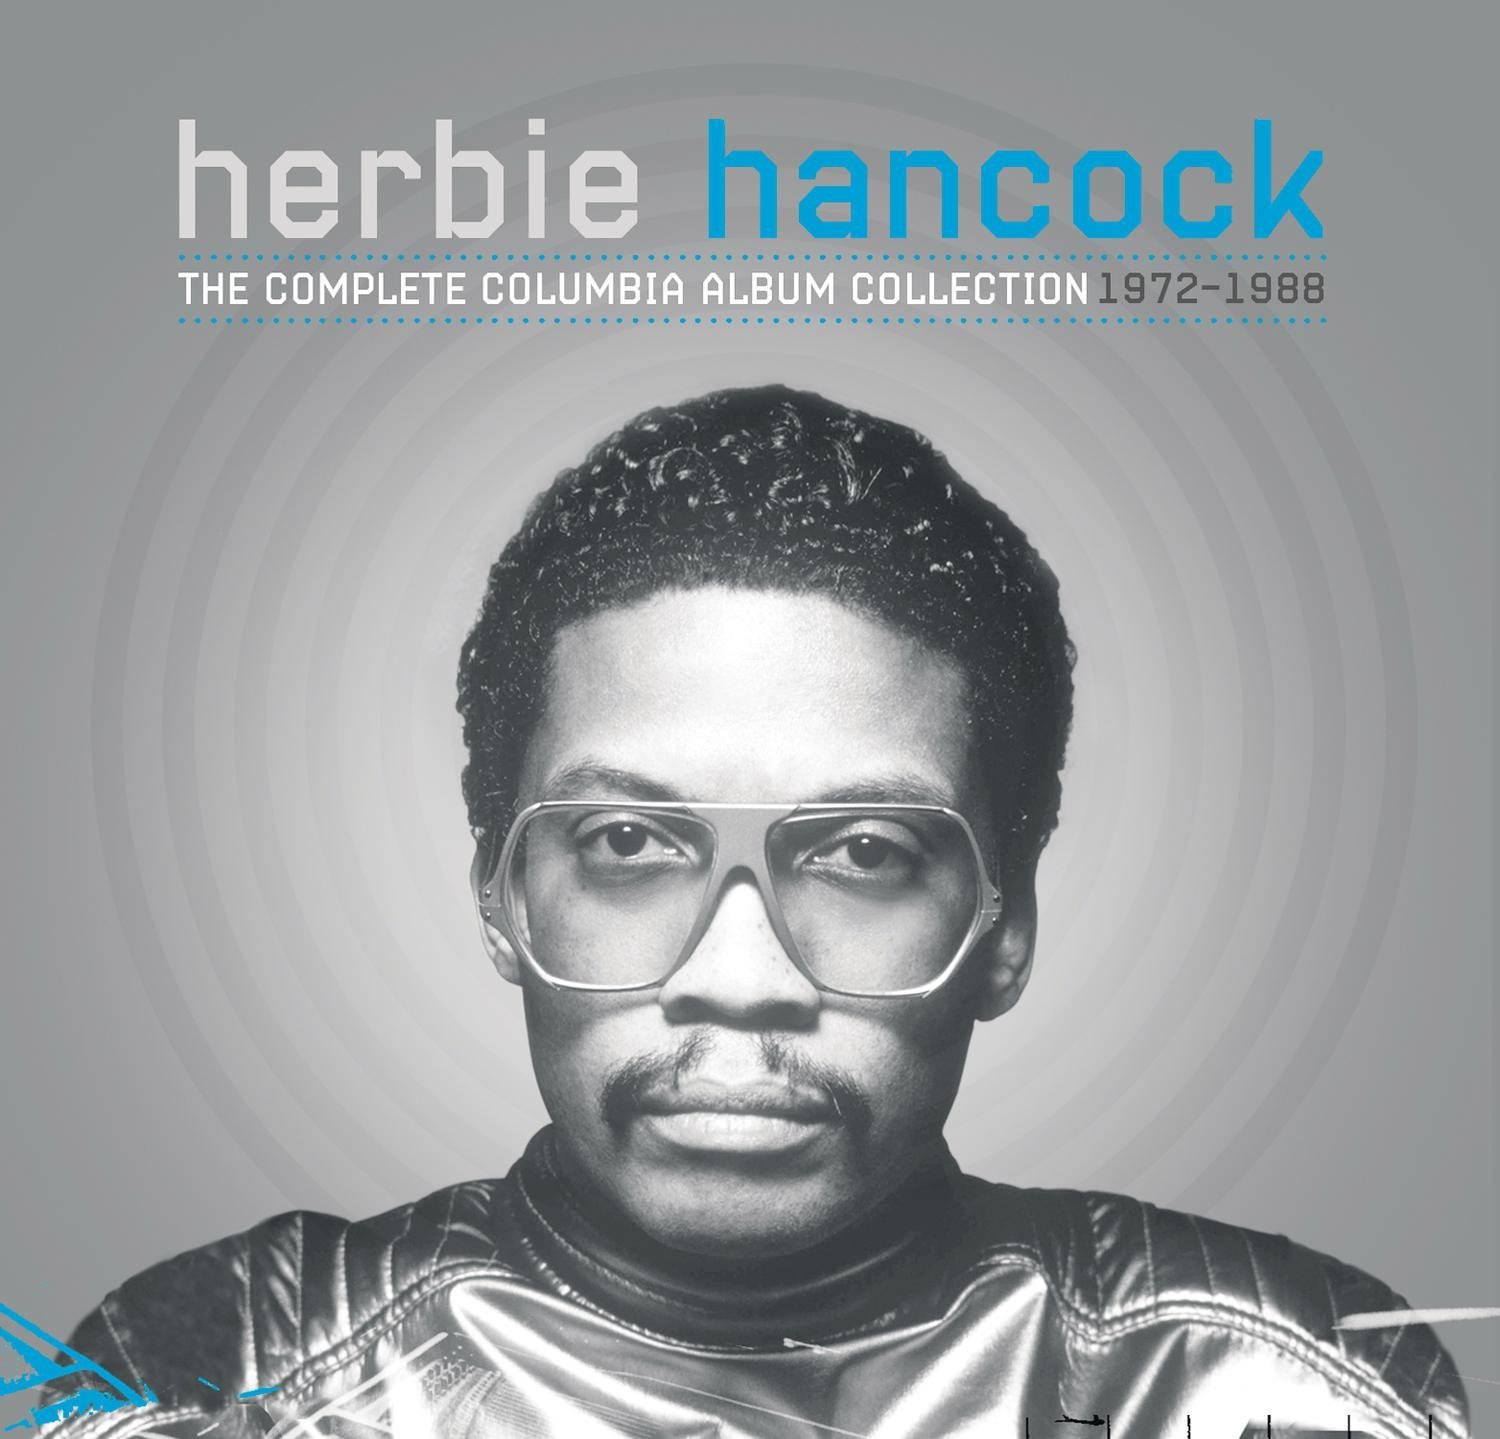 Herbie Hancock The Complete Columbia Album Collection Cover Wallpaper